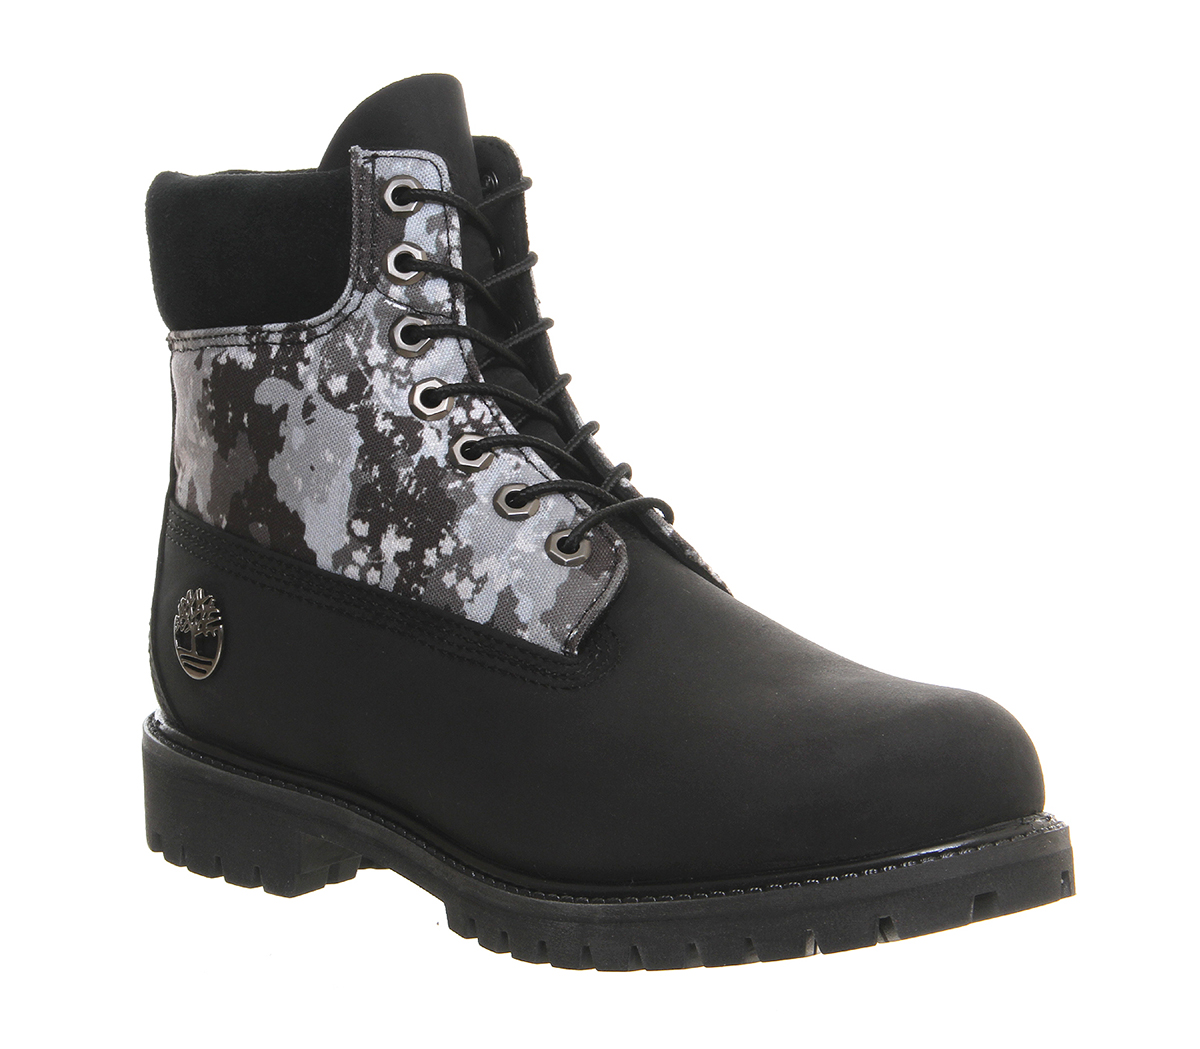 Timberland 6 In Buck Boots Black Camo 